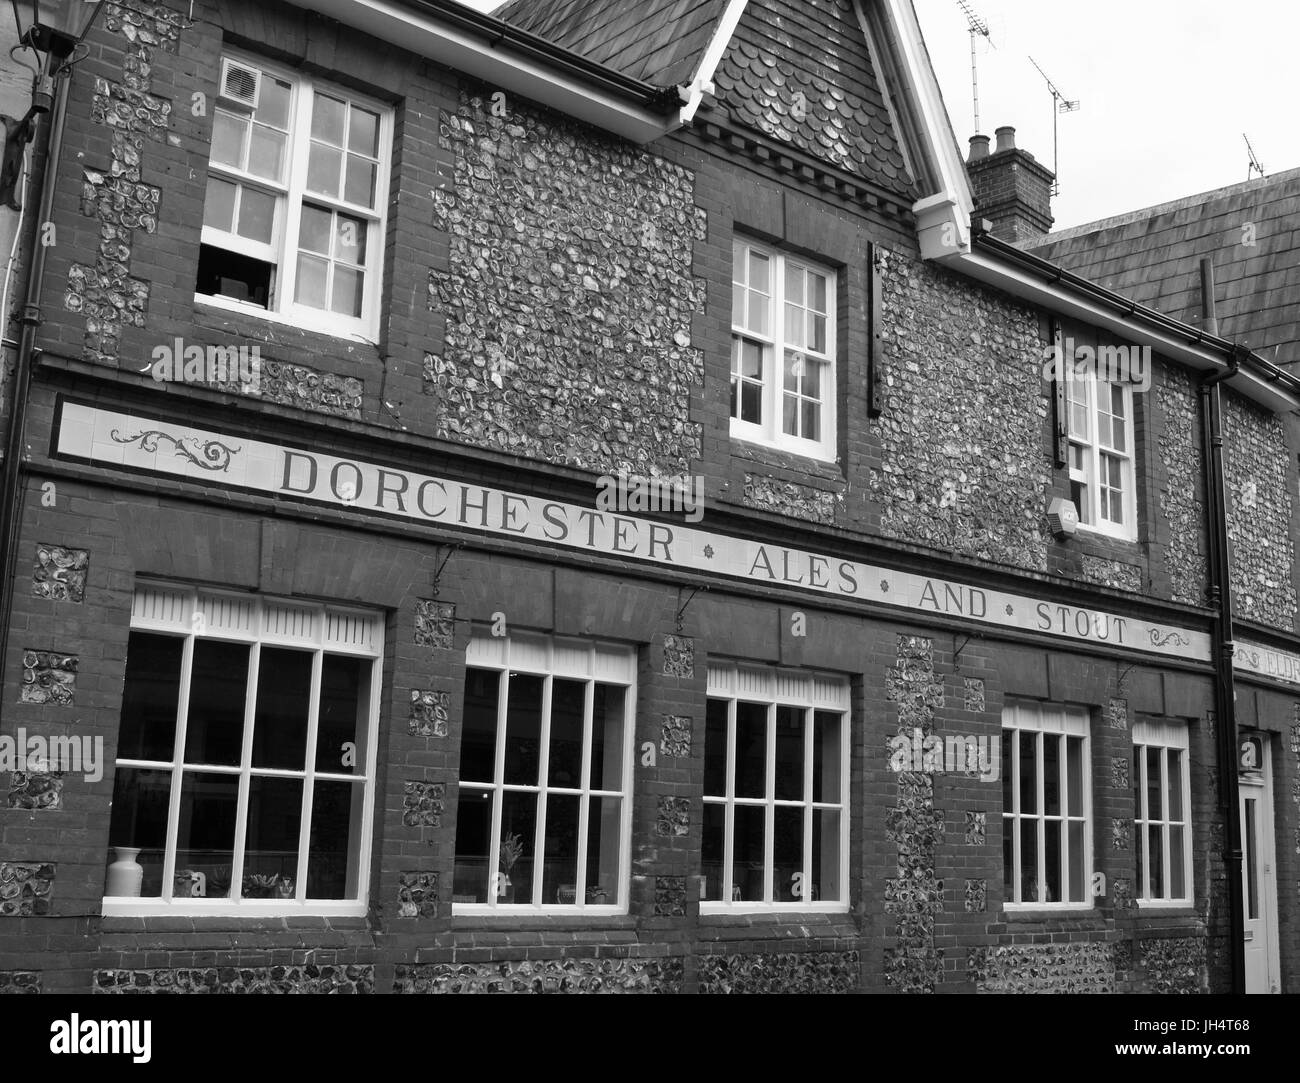 Black and white image of old Dorchester Ales & Stouts public house signage in Winchester, Hampshire, England, UK Stock Photo